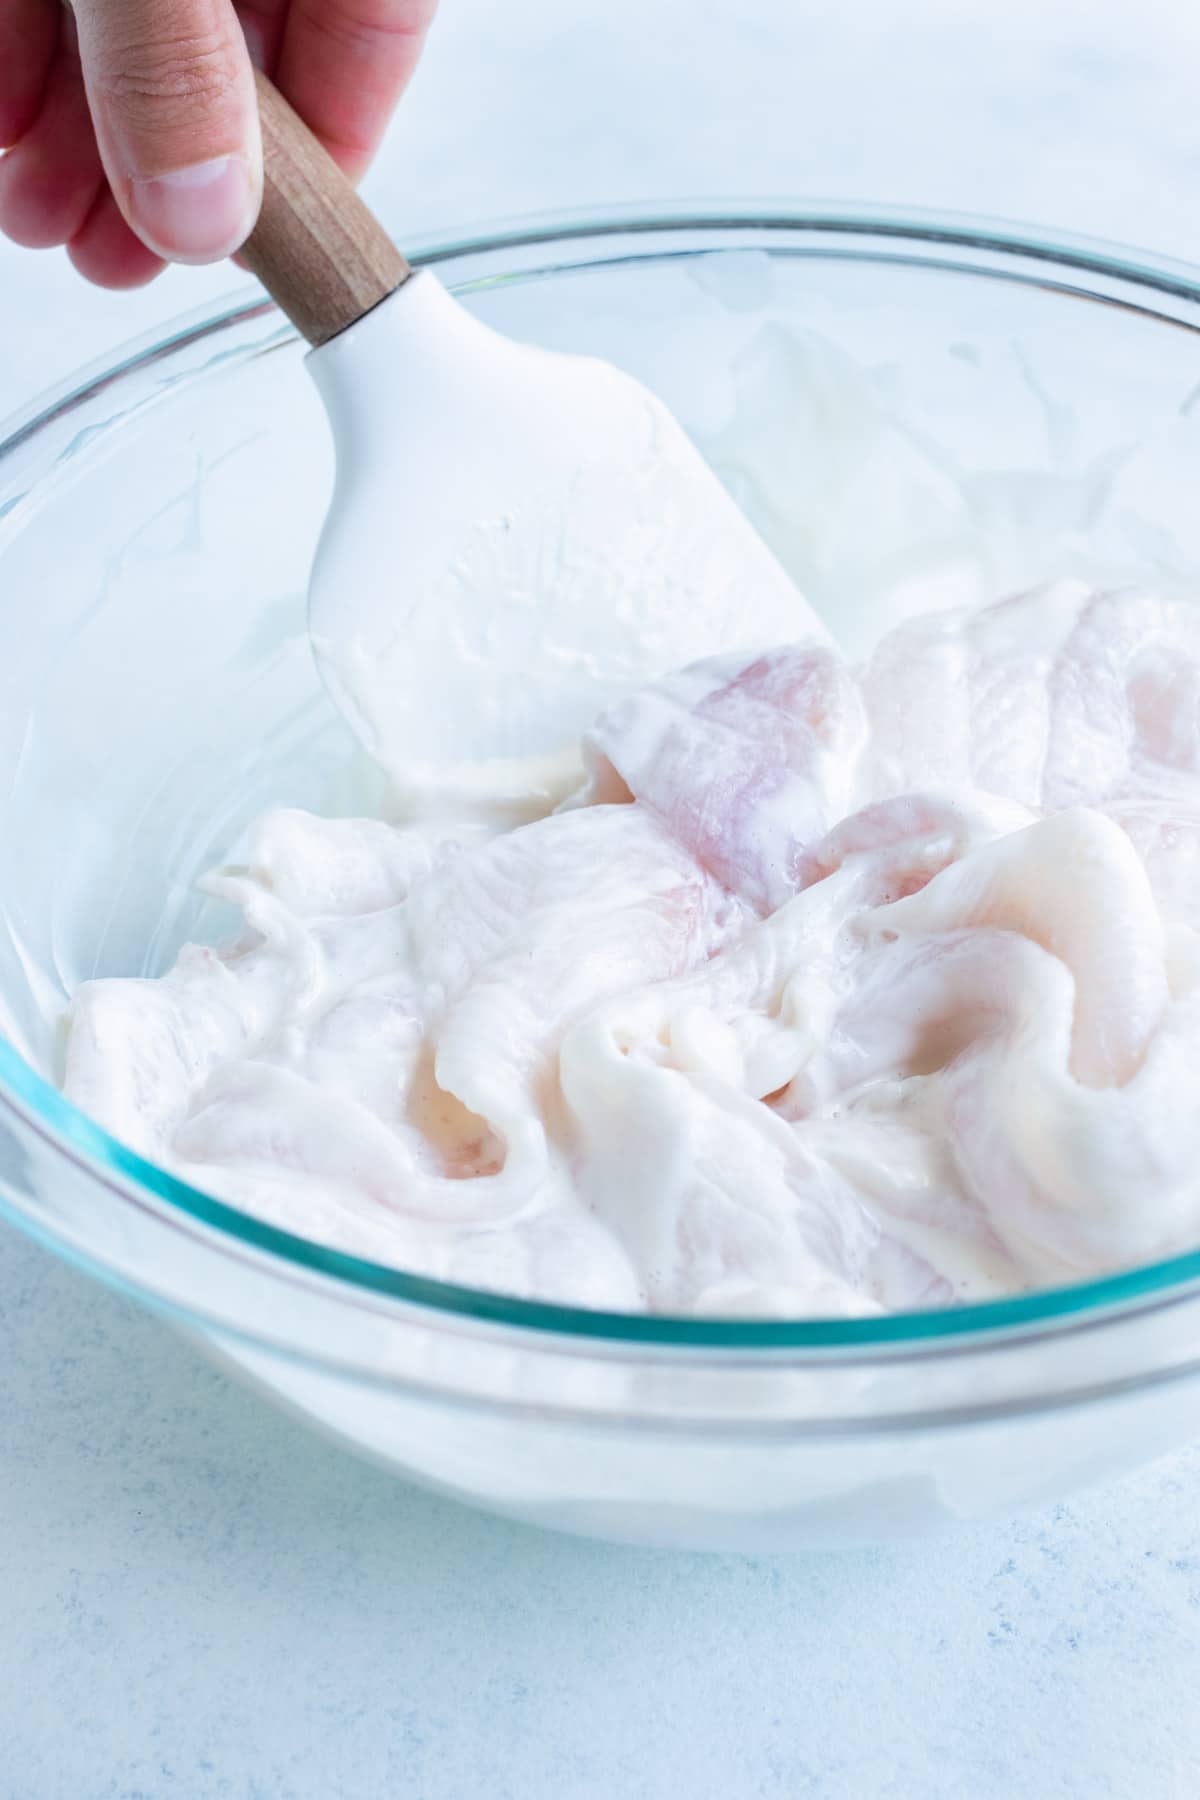 The fish is coated in mayonnaise in a glass bowl.